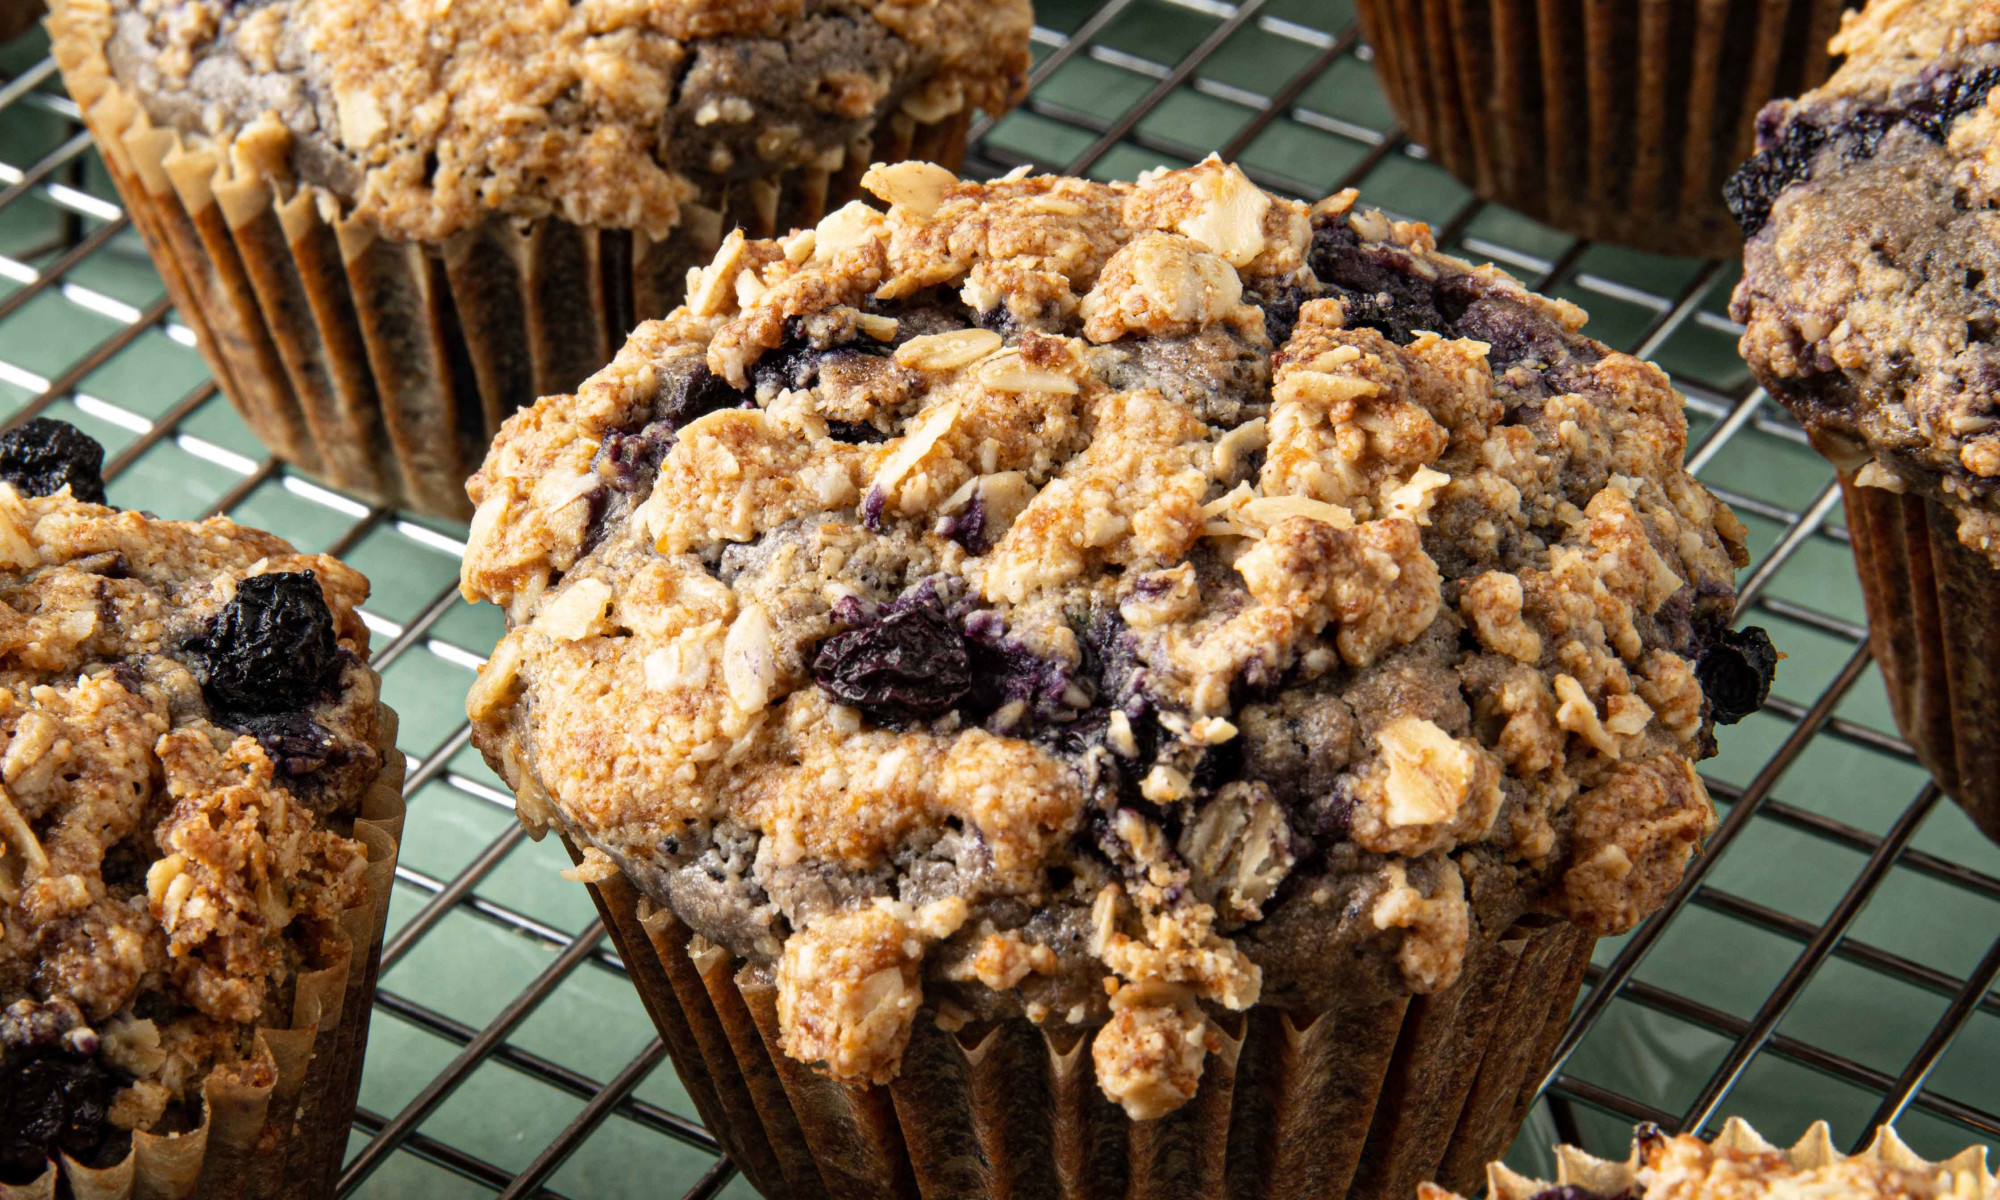 These Blueberry Oat Muffins Pack Extra Fiber & Antioxidants